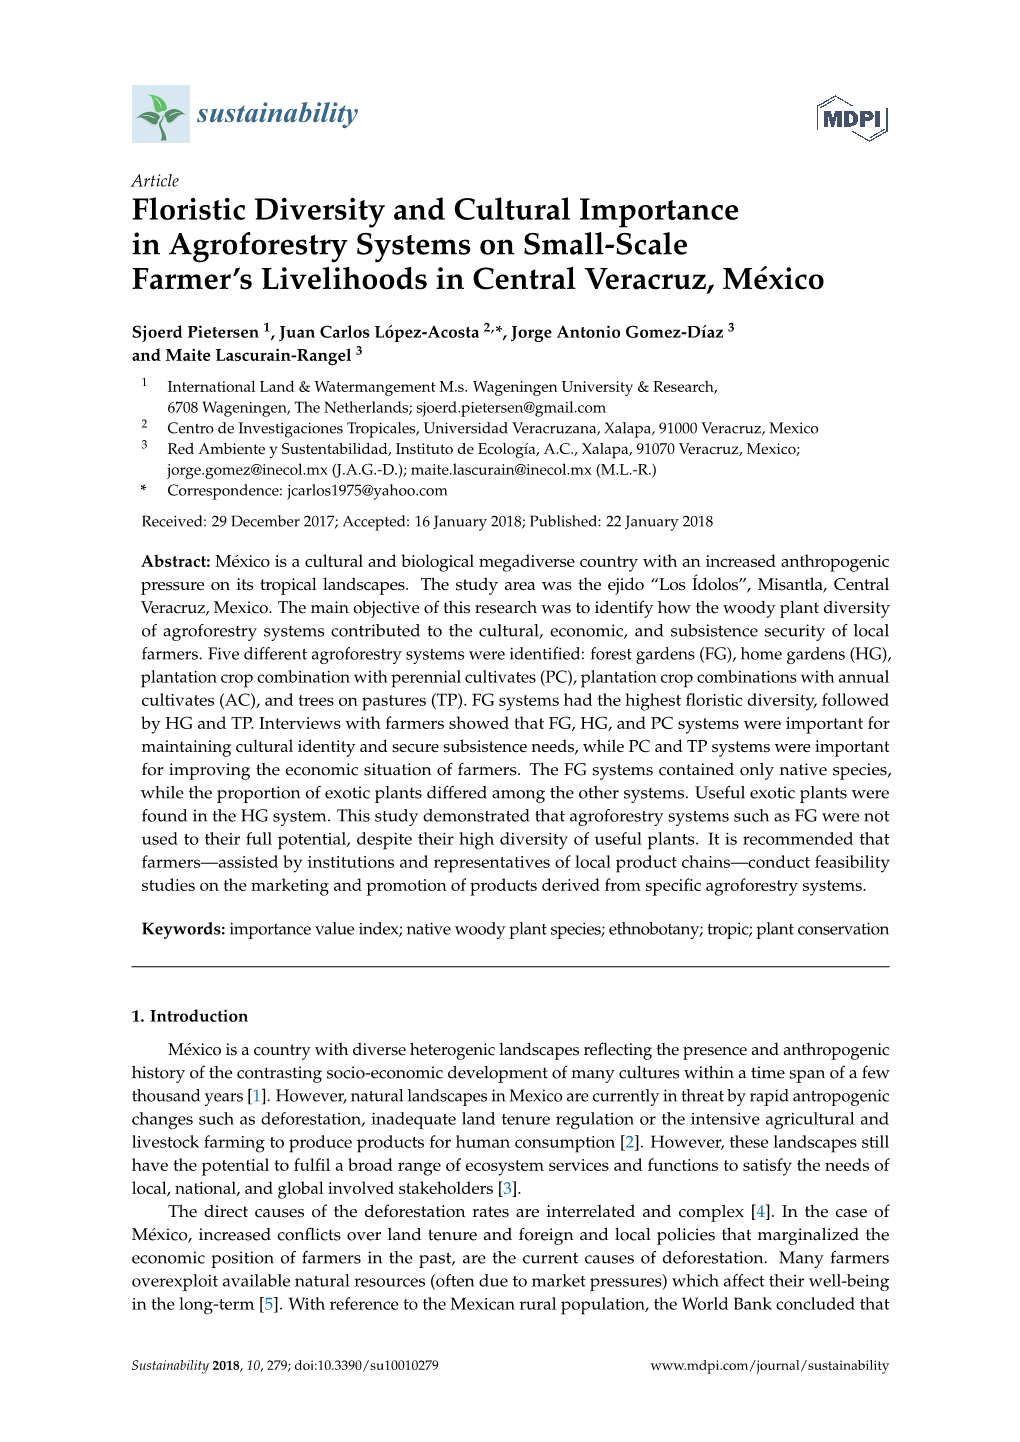 Floristic Diversity and Cultural Importance in Agroforestry Systems on Small-Scale Farmer’S Livelihoods in Central Veracruz, México